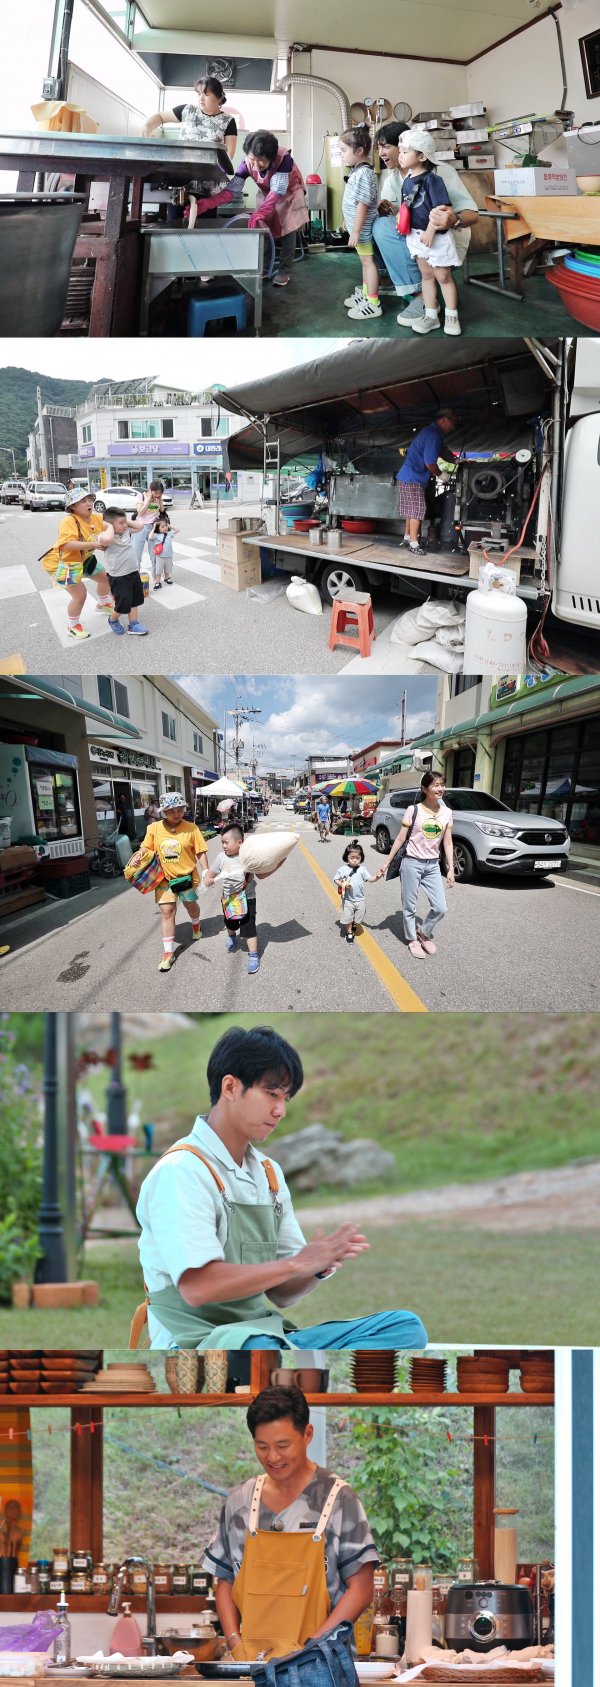 In SBSs Monday Entertainment Little Forest: Summer of the Blossom (hereinafter referred to as Little Forest), which is broadcasted today (17th), Lee Seo-jin X Lee Seung-gi X Park Na-rae X Jung So-min, and the scene of the Welcome to Cheuseok market outing of four members and Little Lee will be revealed.Recently, members and Littles headed to the market to buy the ingredients needed for holiday food.Little, who showed up for the first time with the Uncle and aunt, was not particularly excited about the popping and rice cake picking.In addition, Little Lees received pocket money from the members and shopped what they wanted to buy, and they are looking forward to what kind of things Little Lees who went on their first shopping life would have bought.After returning home from shopping, the members made Songpyeon with Little.Lee Seung-gi, who became the Master Show of Songpyeon with his unexpected Songpyeon skills, raised his confidence to the highest level by listening to Park Na-raes virtue of I will have a beautiful daughter, and tasted his songpyeon and said, Songpyeon of the Year I laughed because I didnt stop.Members and Littles Welcome to Cheuseok shopping and songpyeon making scene can be found at Little Forest, which is broadcasted at 10 pm tonight.